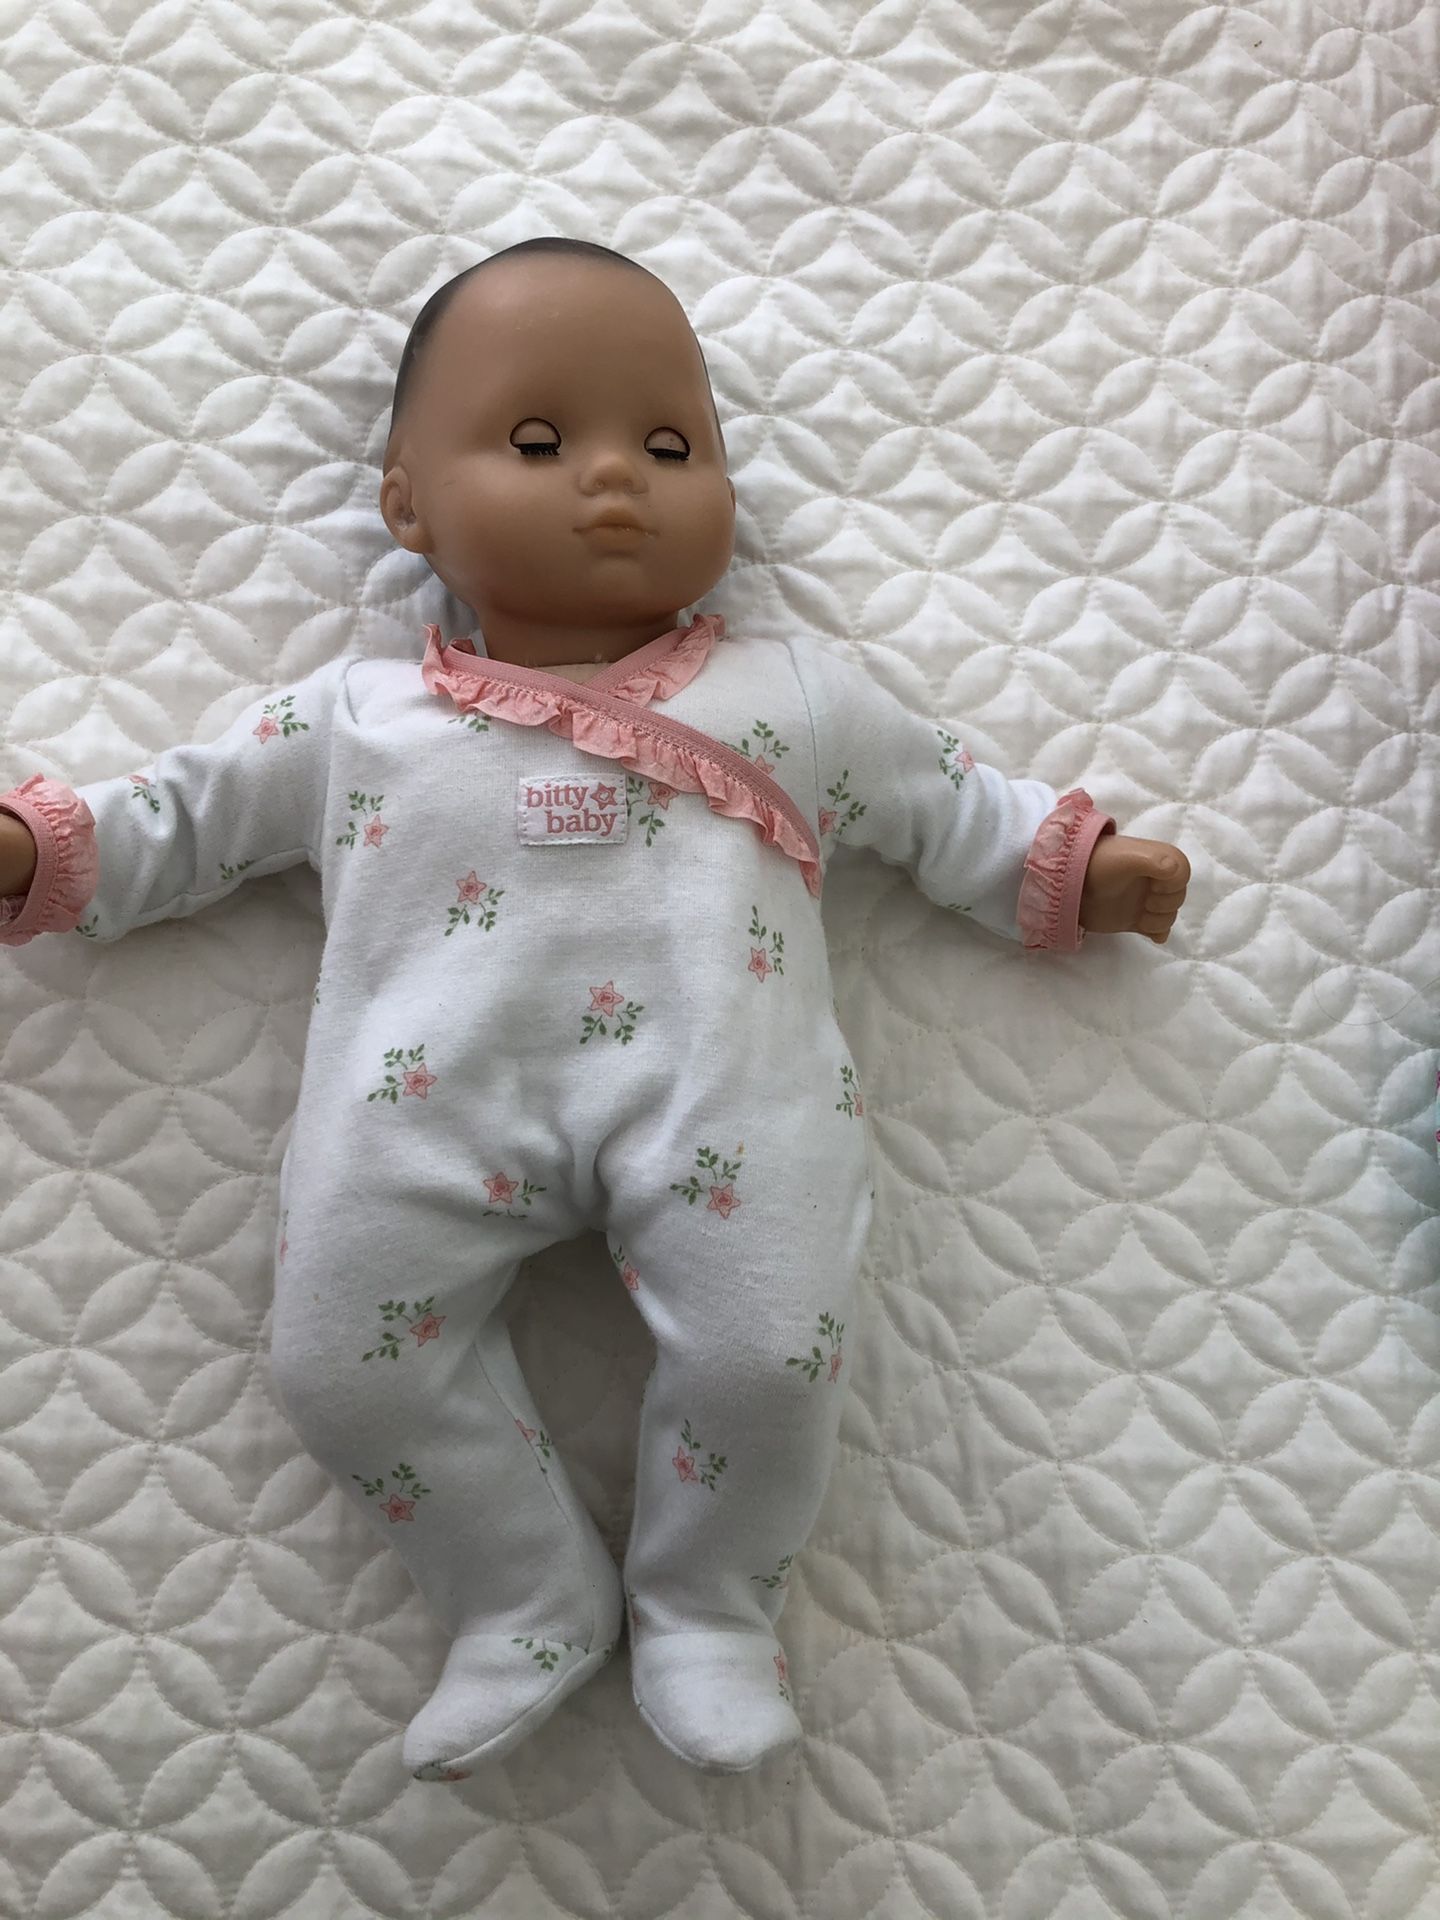 Bitty Baby 15” with accessories